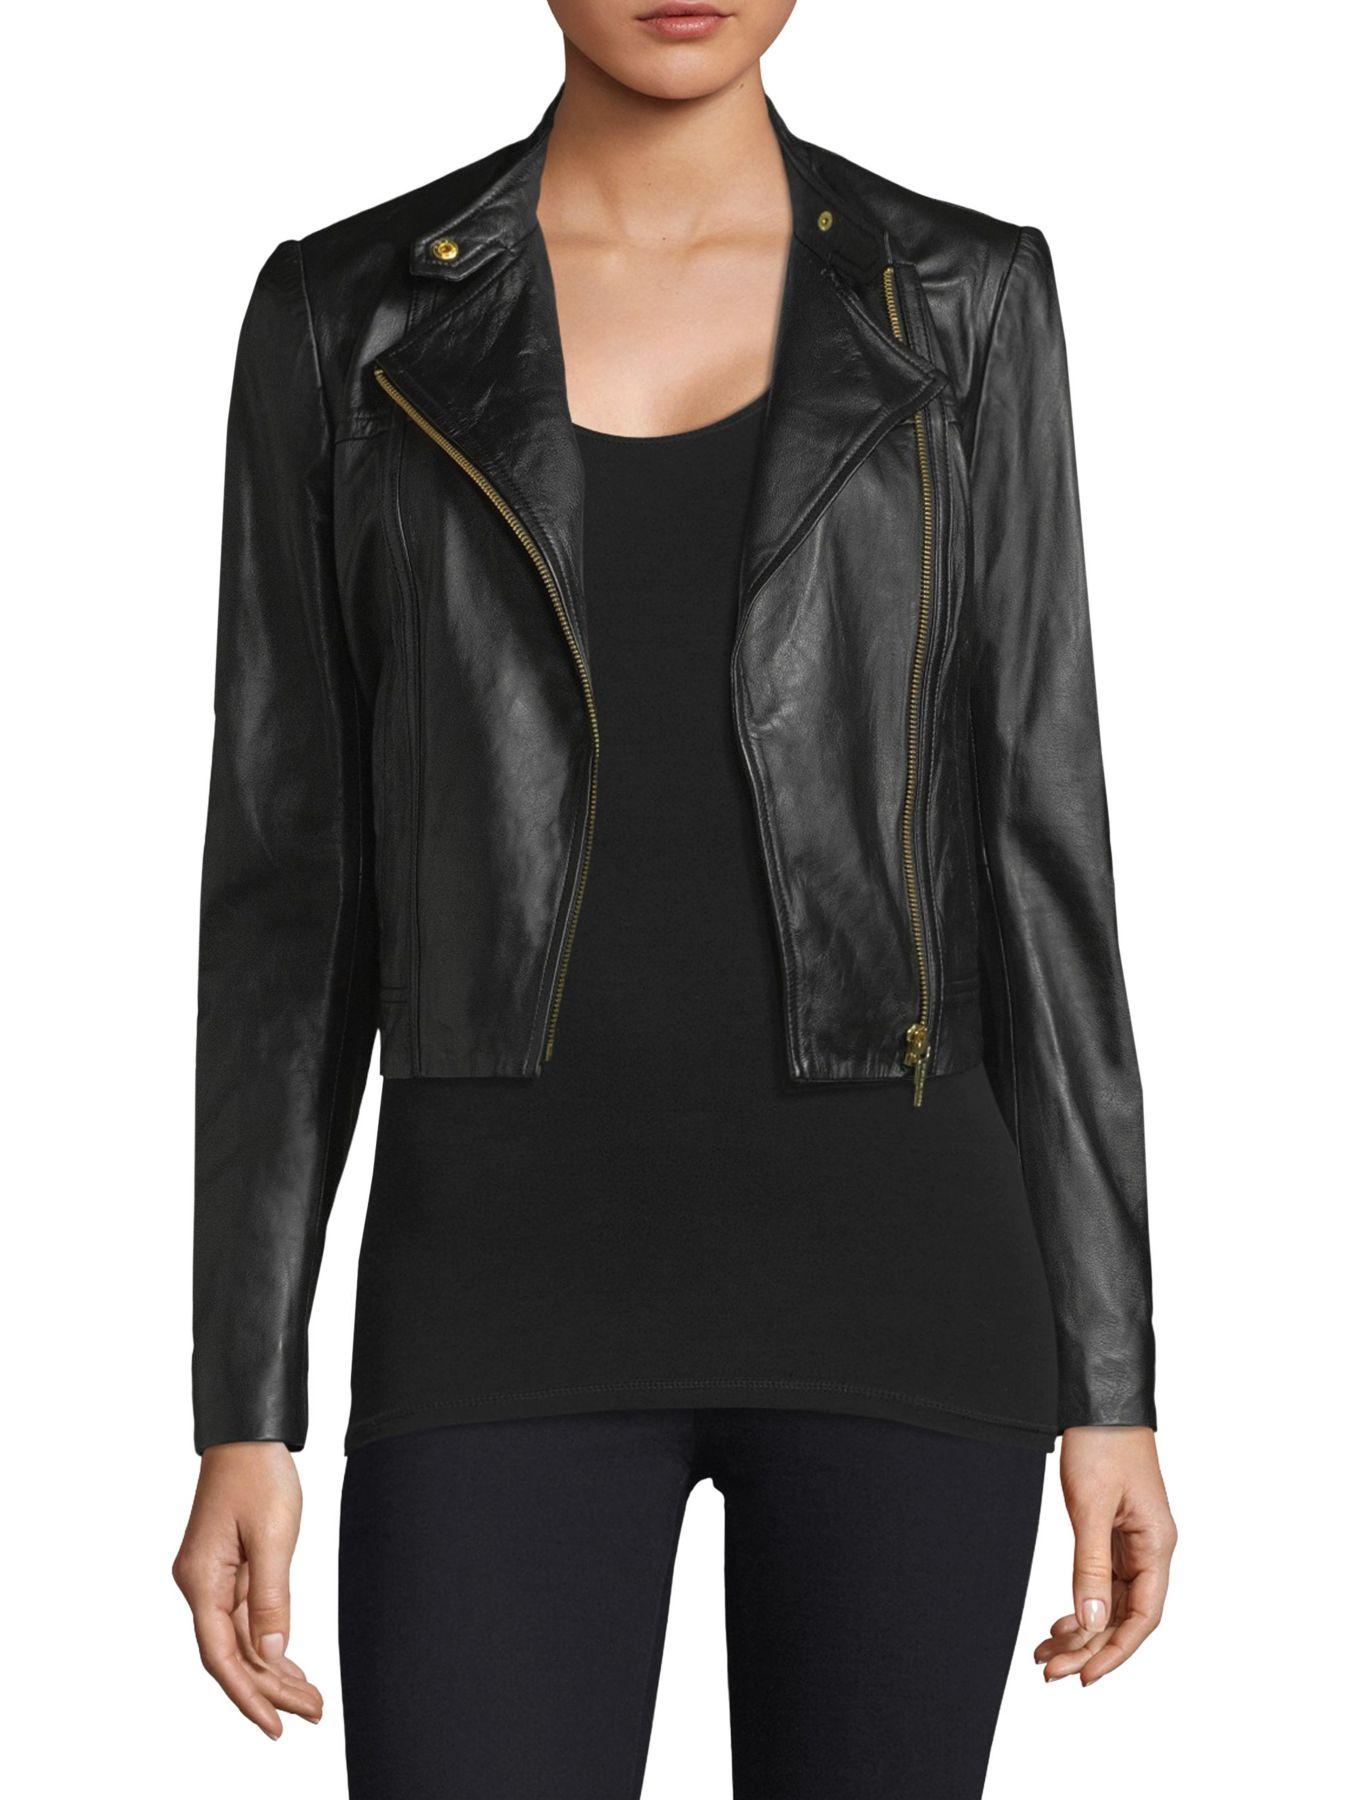 MICHAEL Michael Kors Cropped Leather Jacket in Black Gold (Black) - Lyst